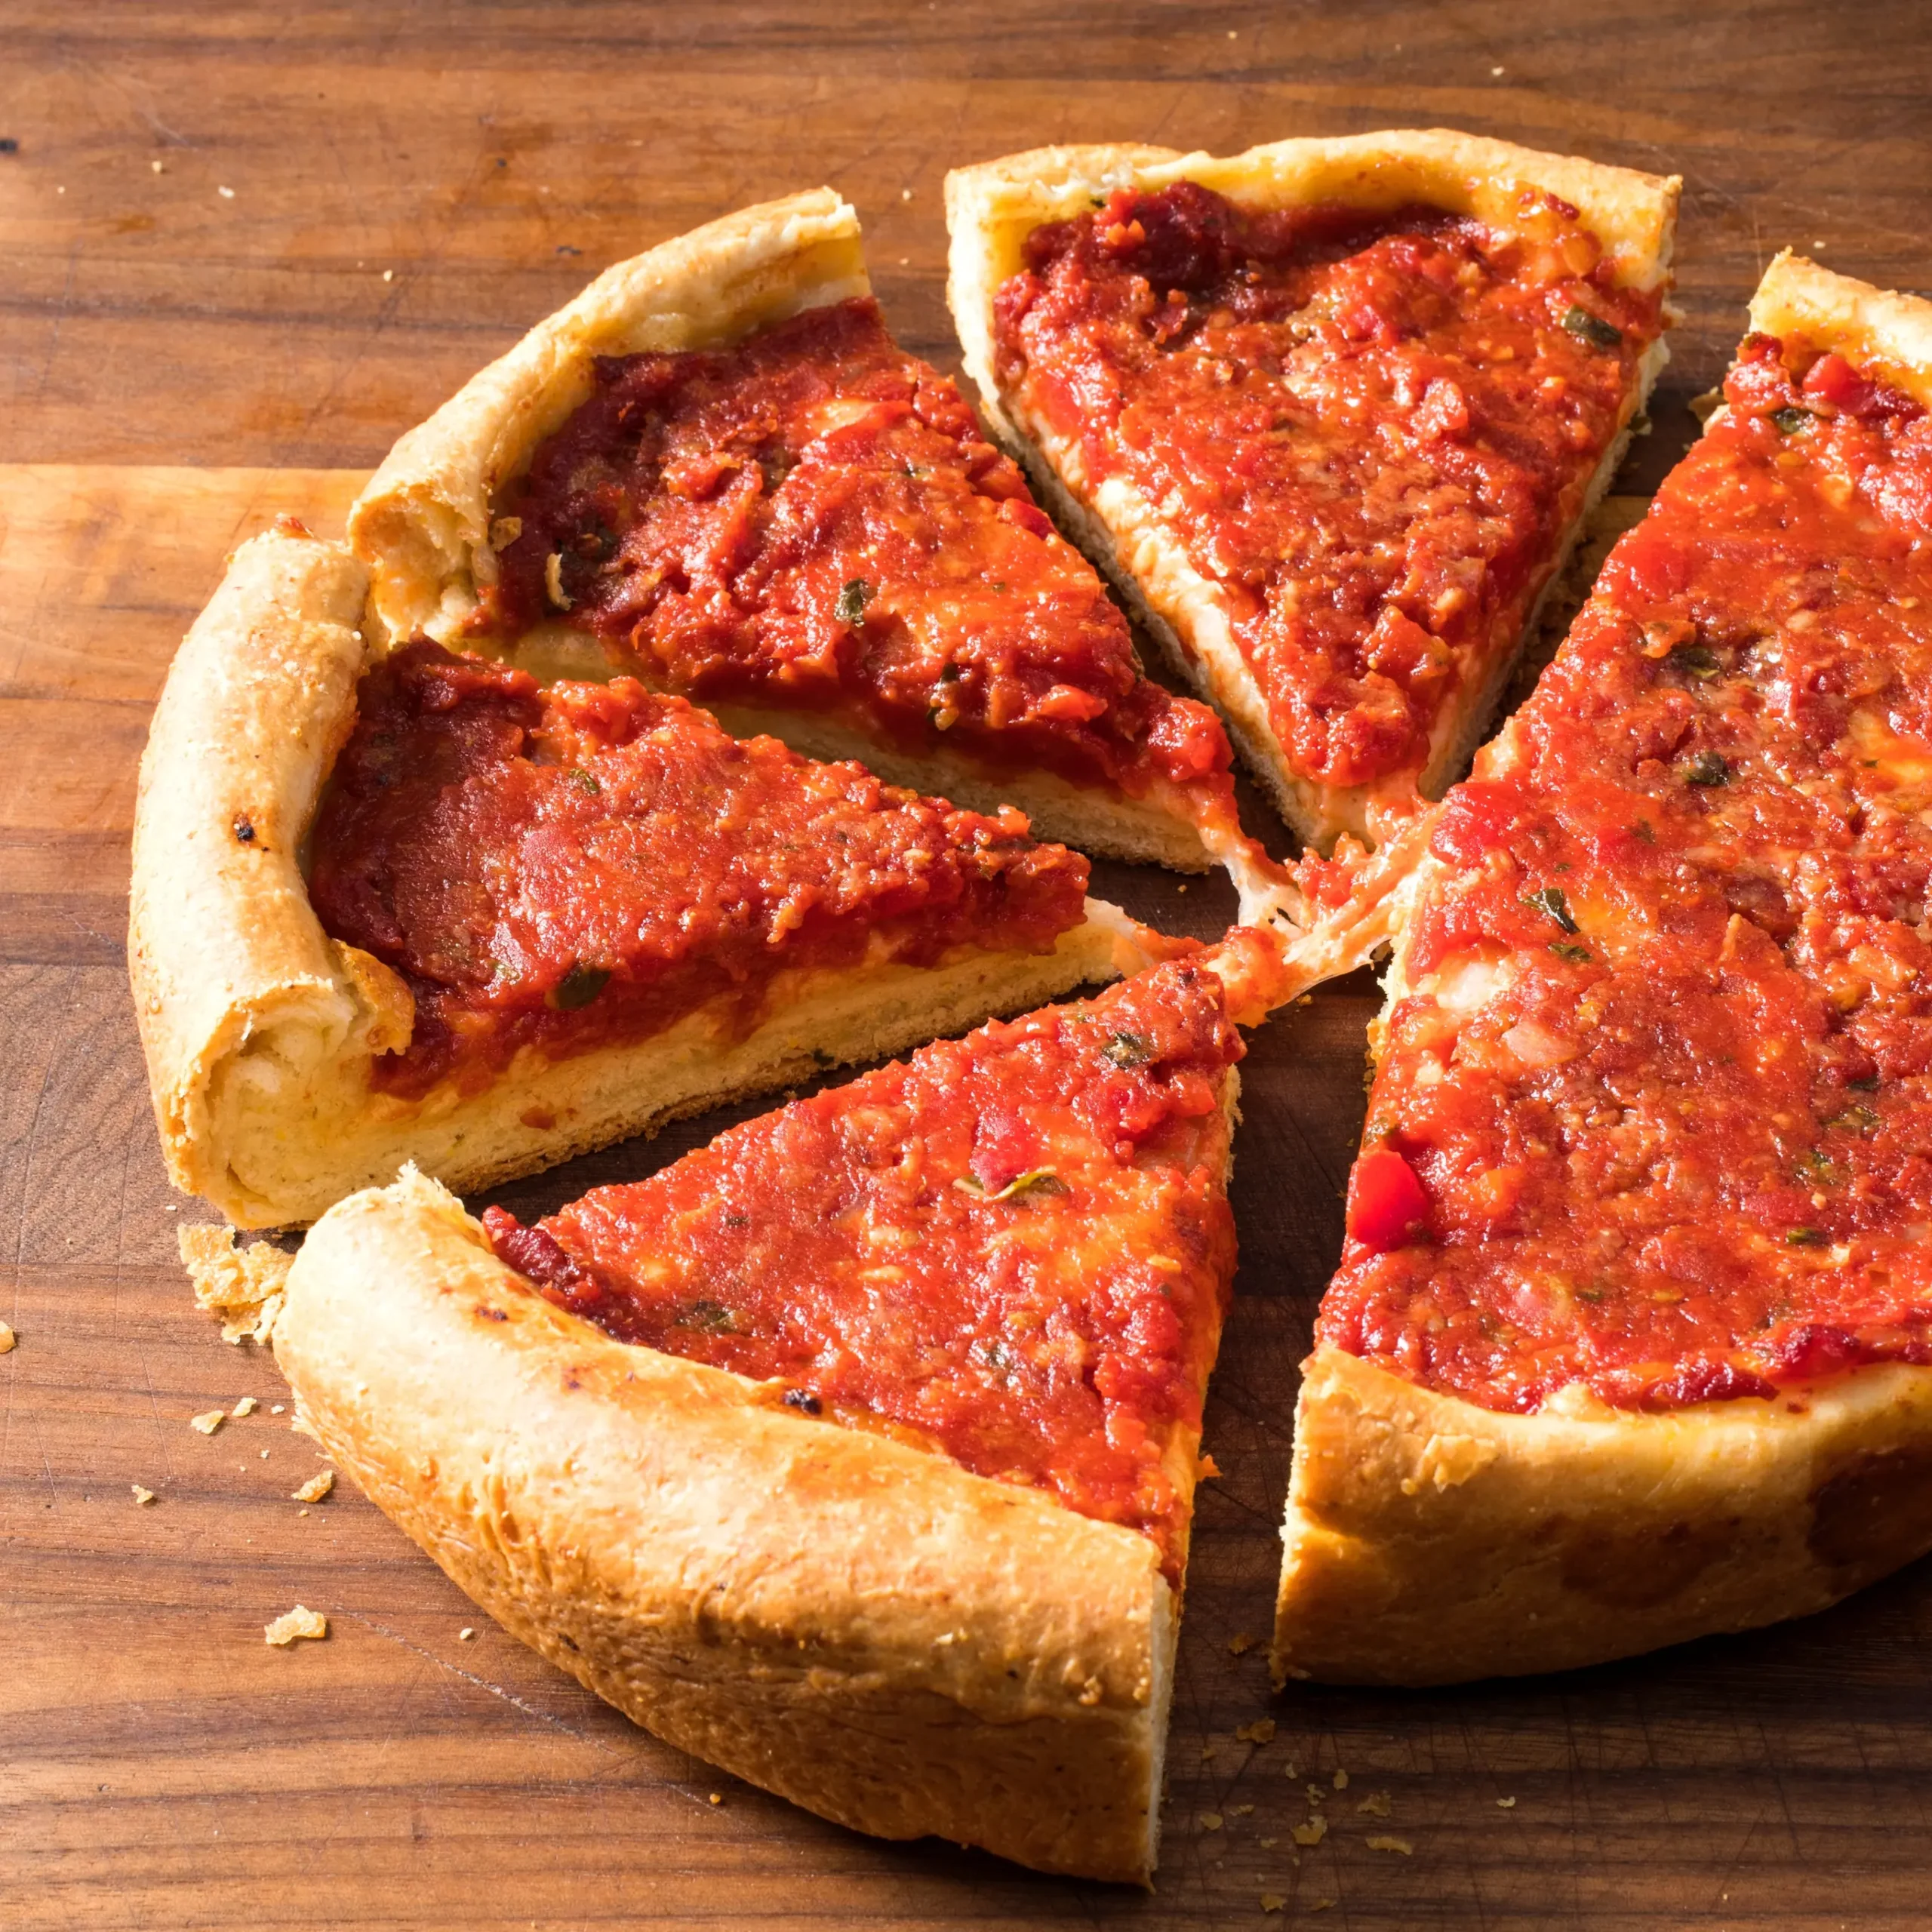 authentic deep dish pizza in chicago - Why is Lou Malnati's better than Giordano's